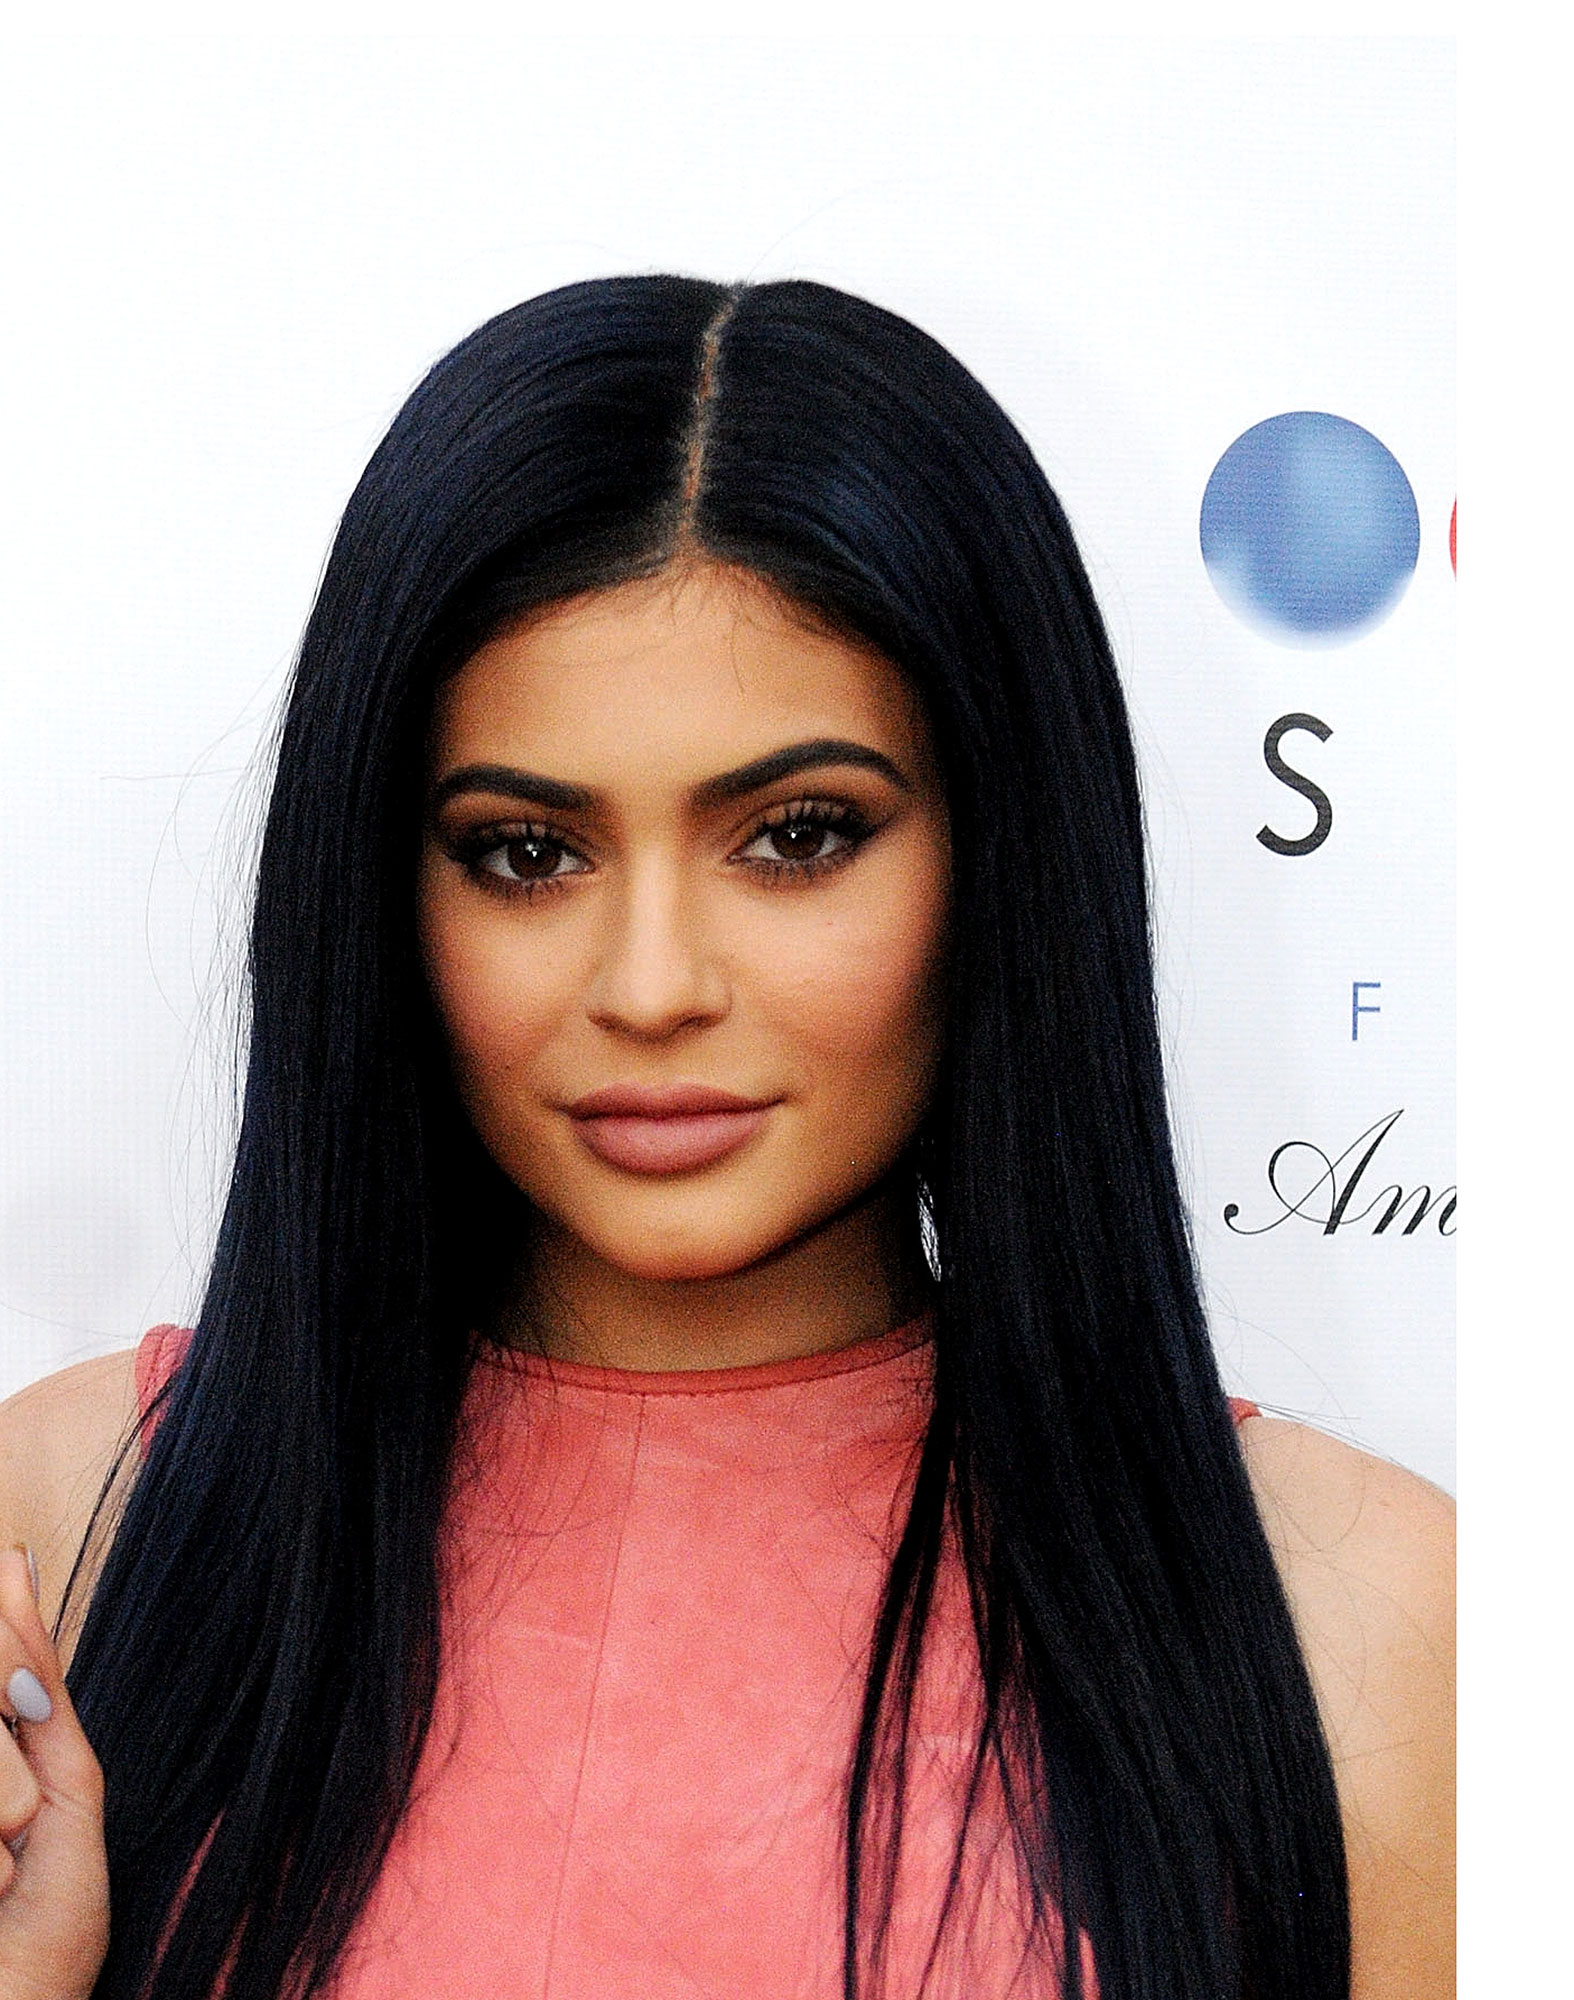 Kylie Jenner How Her Face Has Changed